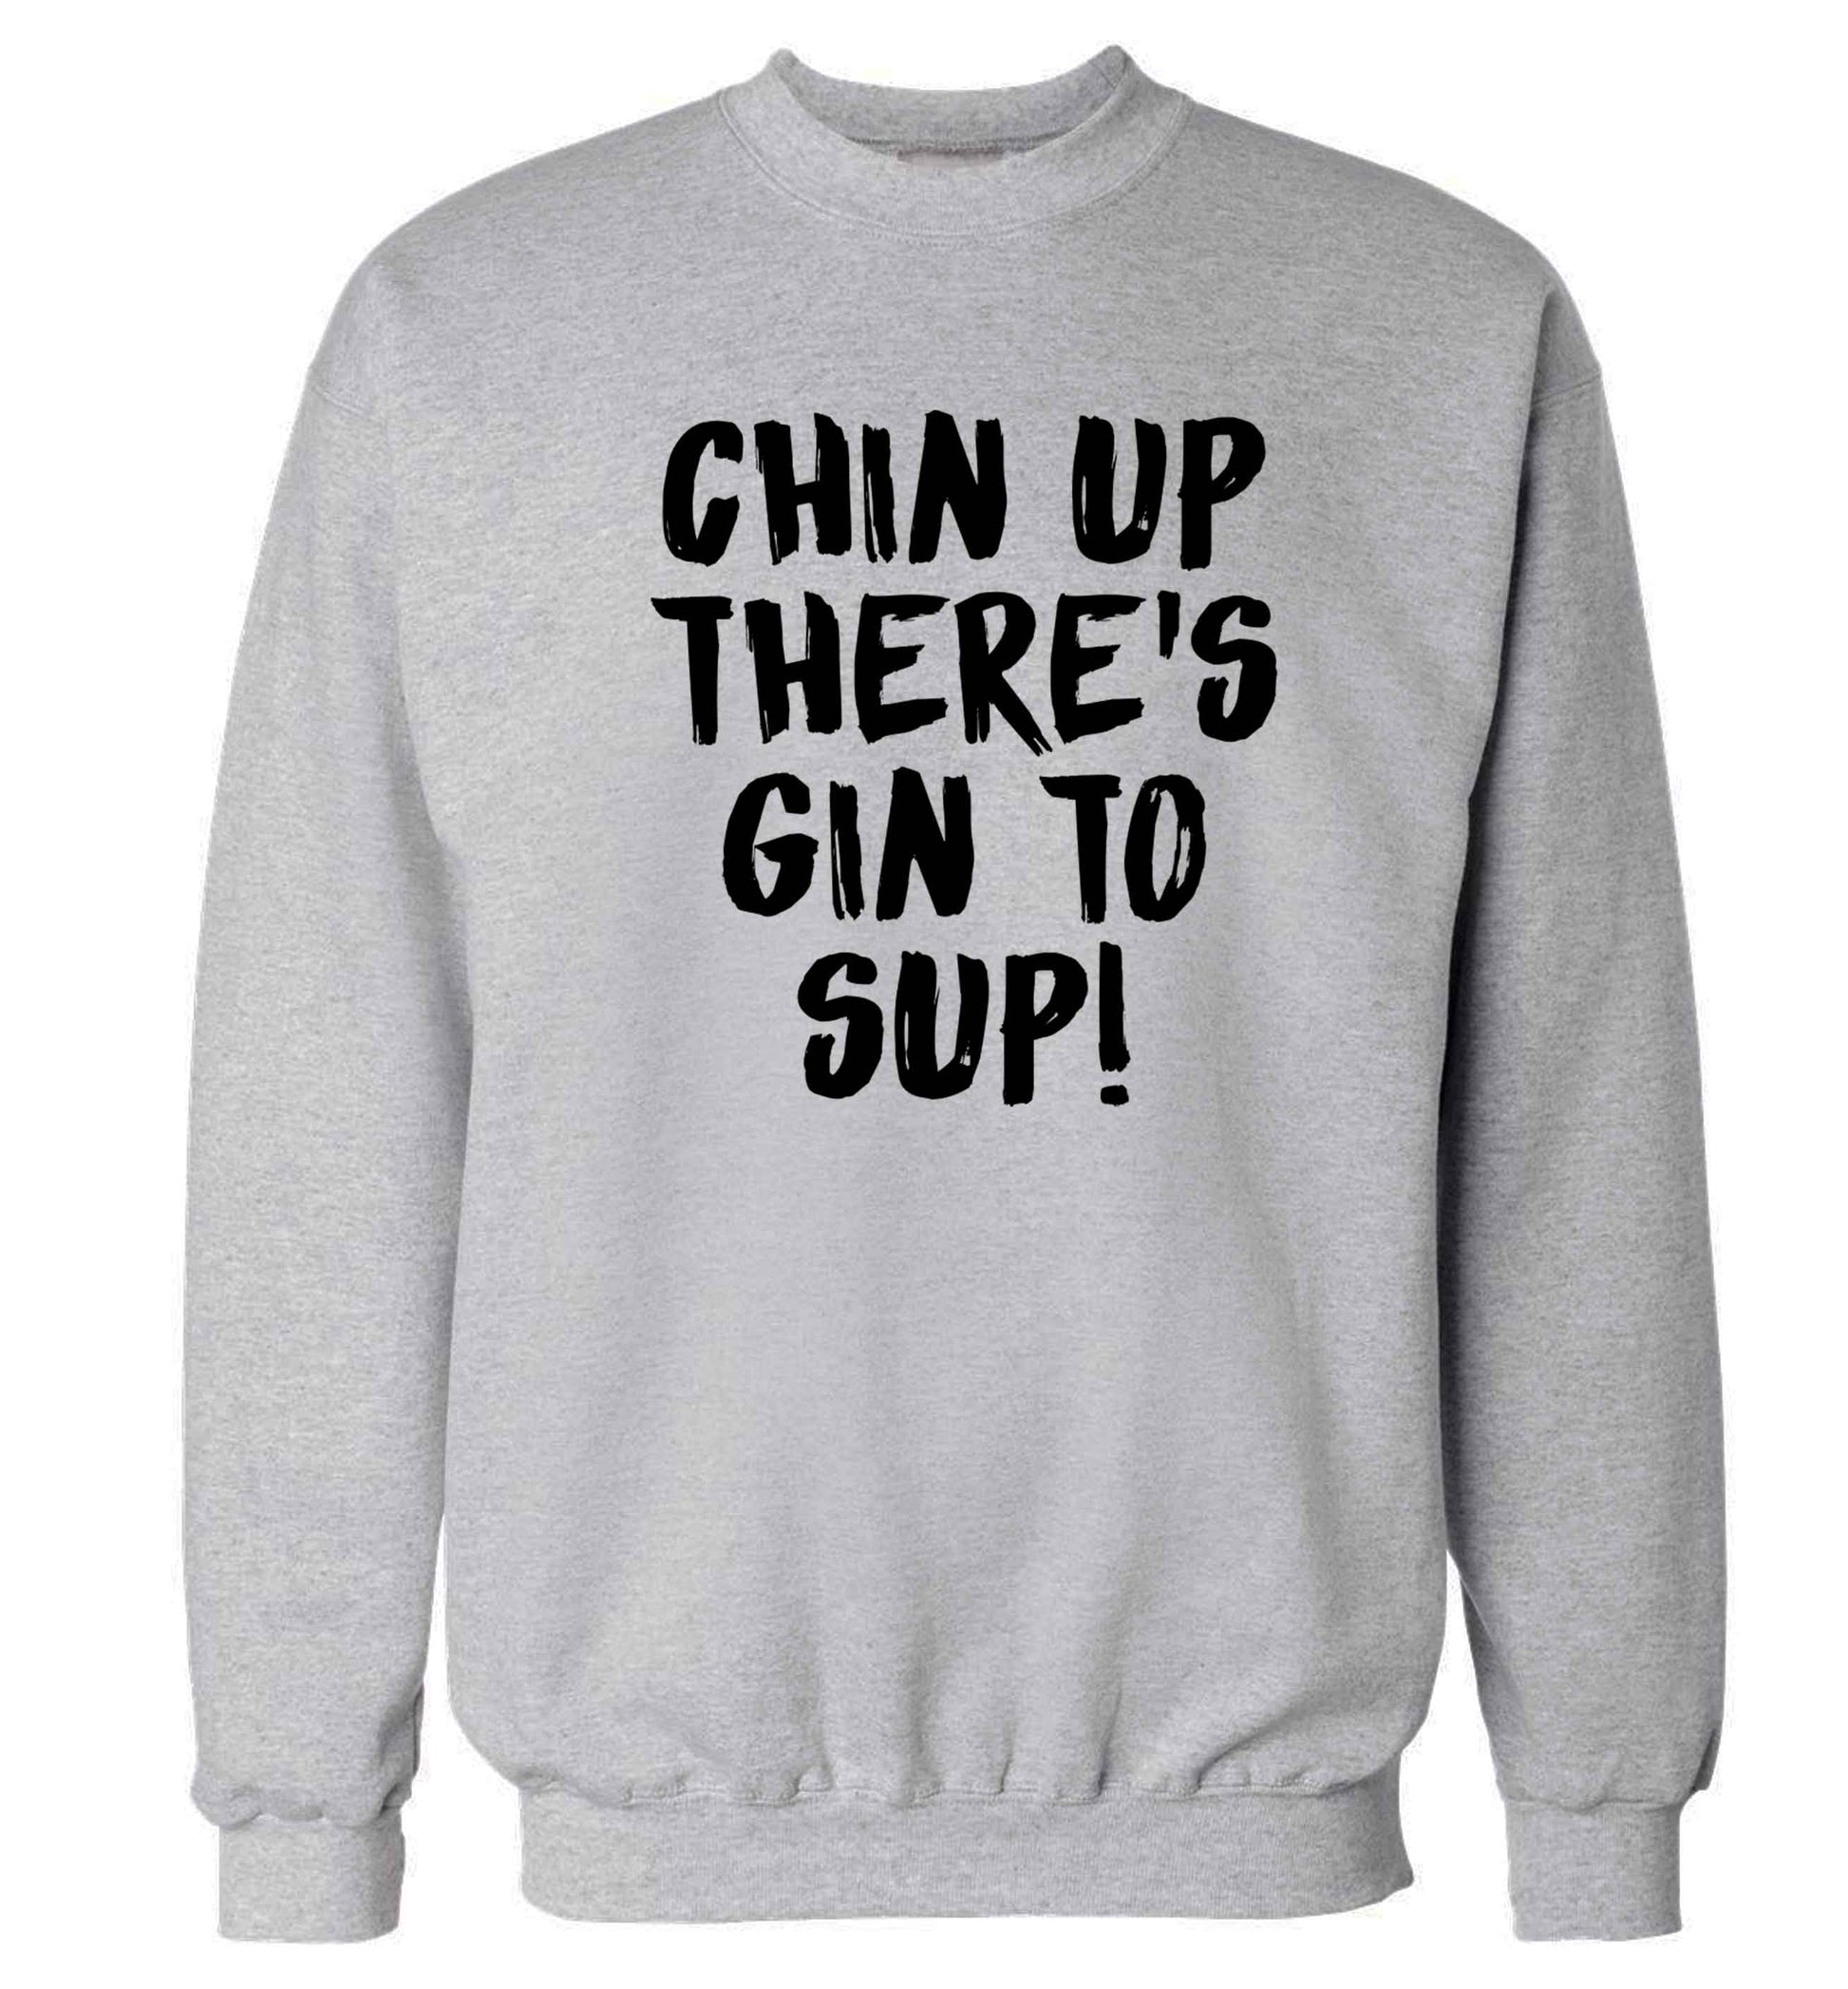 Chin up there's gin to sup Adult's unisex grey Sweater 2XL